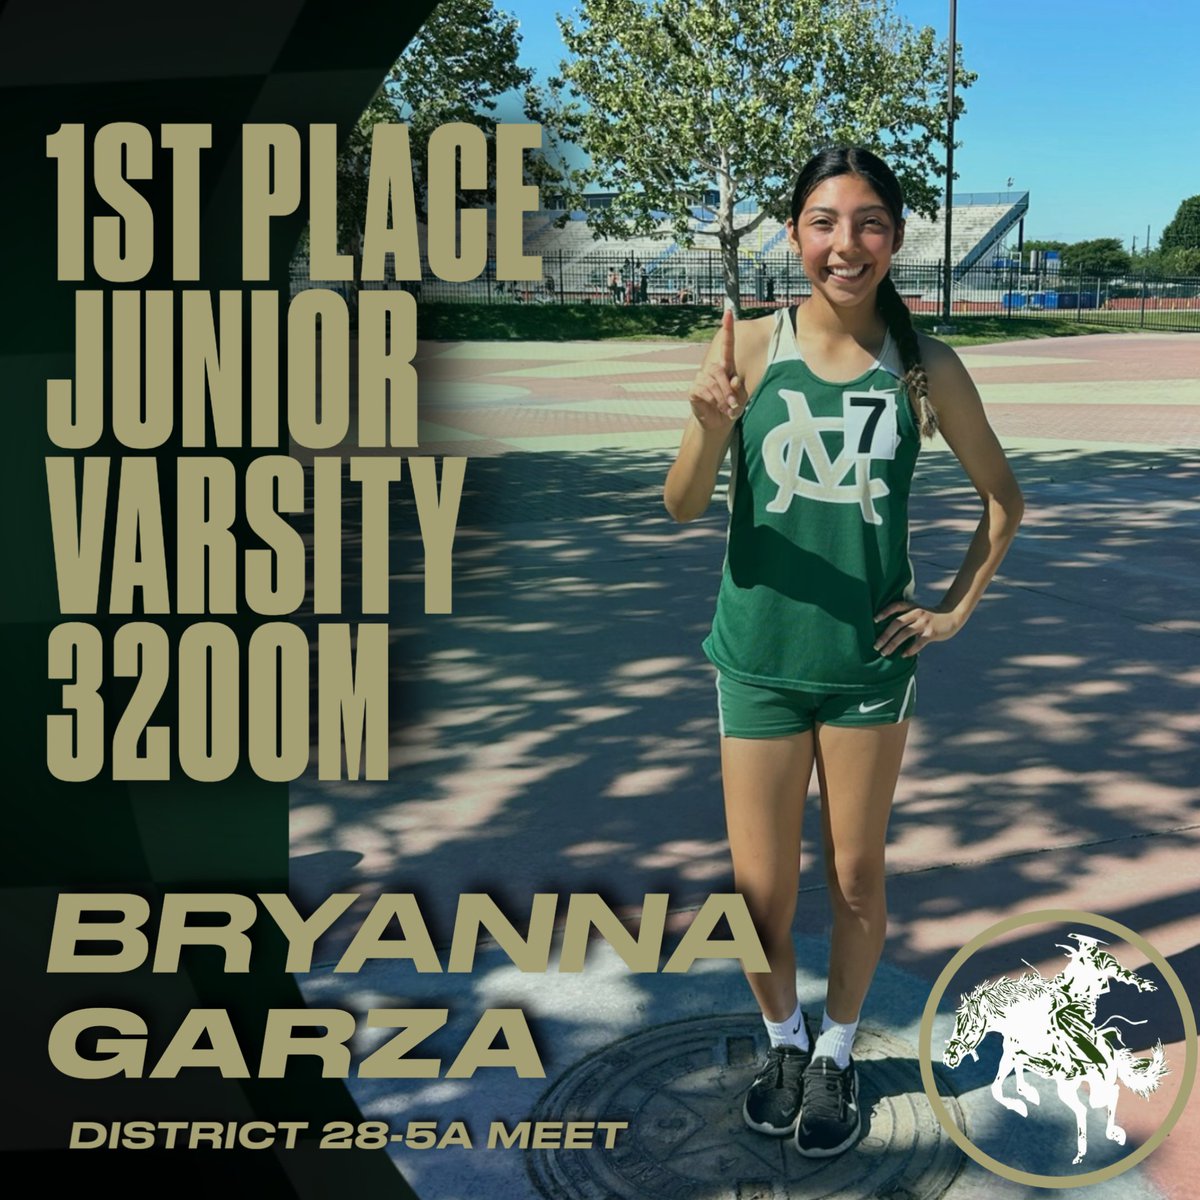 Congratulations to Bryanna Garza for receiving first place in the junior varsity 3200M! Way to go Bry!